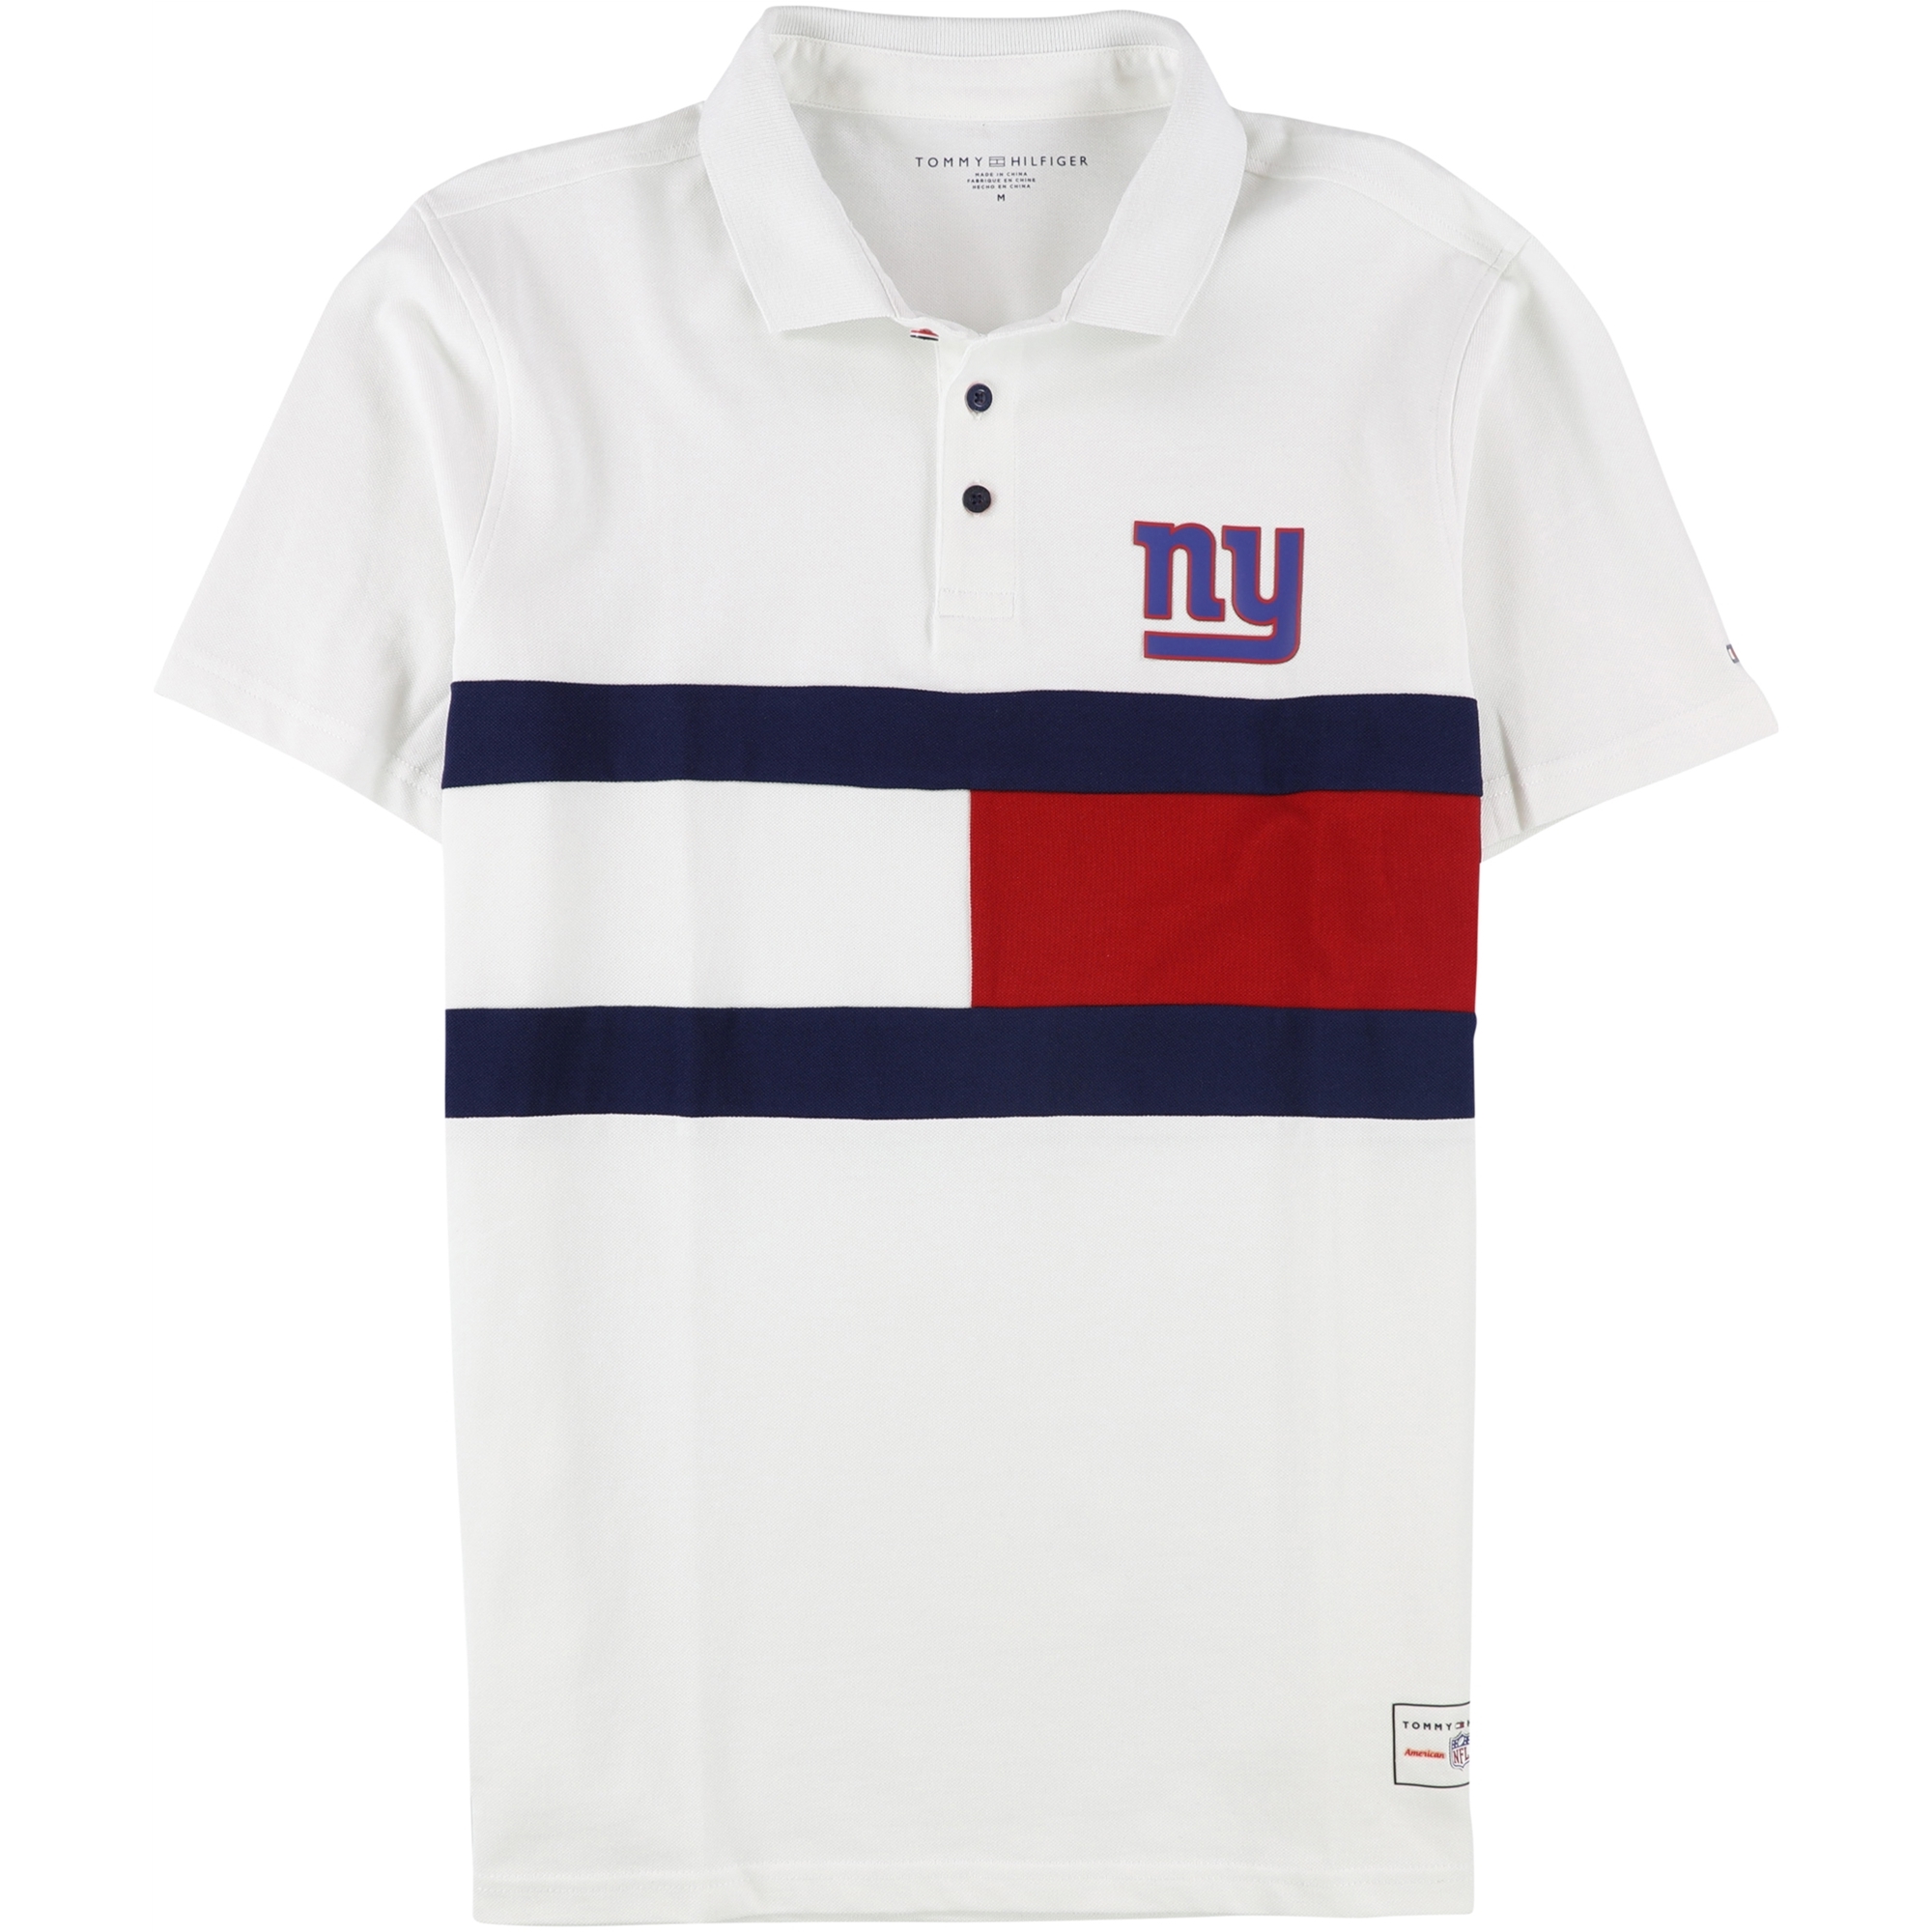 Tagsweekly New a York | Hilfiger Shirt Tommy Polo Giants Mens Rugby Buy